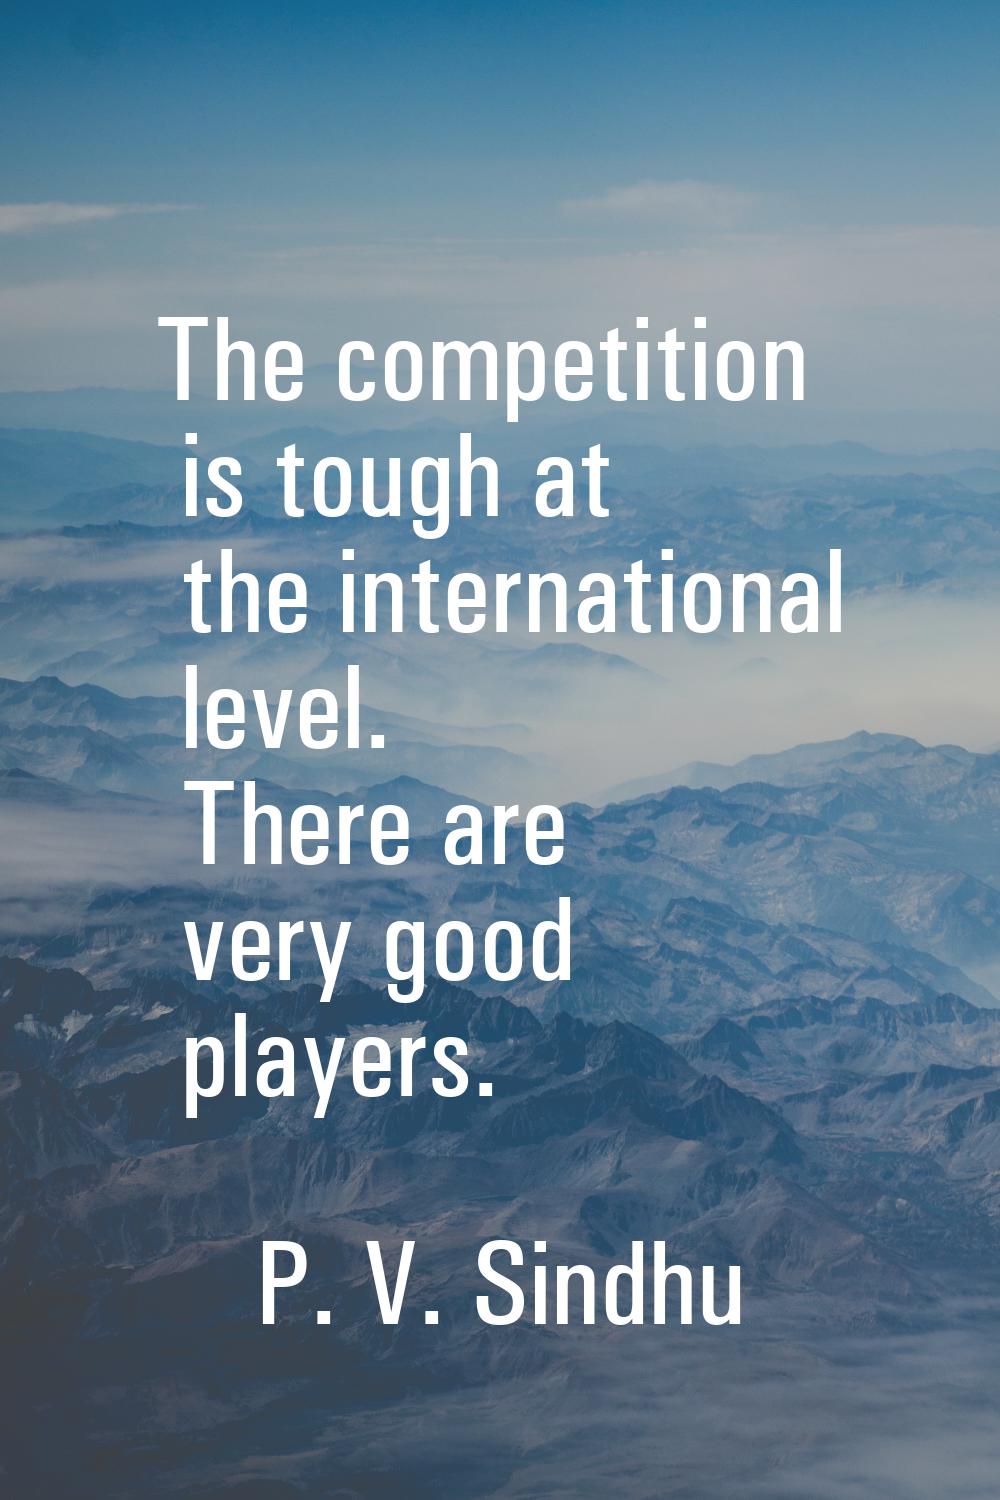 The competition is tough at the international level. There are very good players.